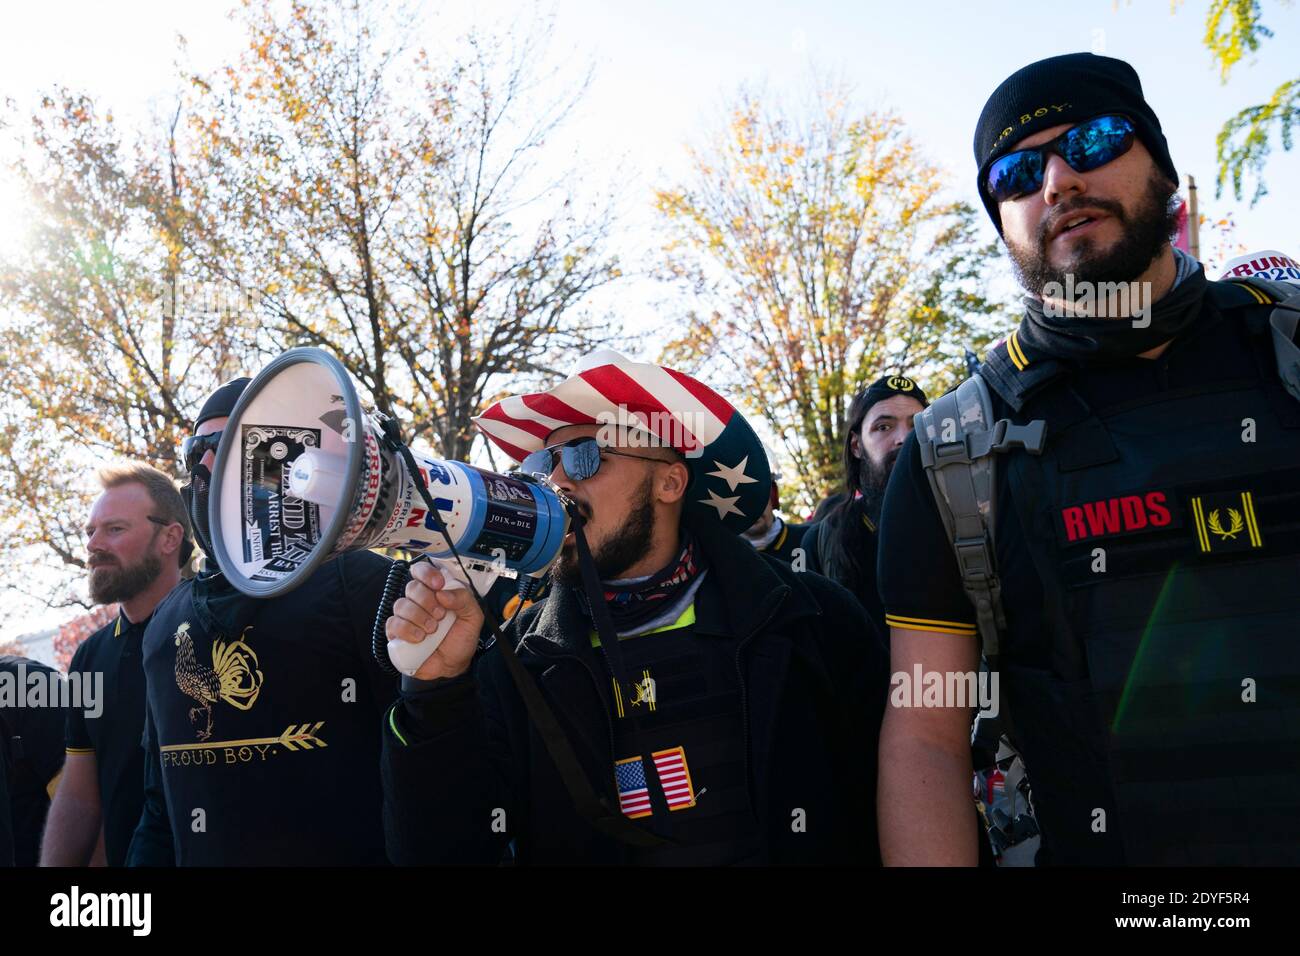 Members of the proud boys are seen at a gathering during the 'Million MAGA March' at Freedom Plaza in Washington, D.C., U.S., on Saturday, Nov. 14, 2020. The rally comes one week after news organizations projected Joe Biden as the winner of the 2020 election and President Trumps refusal to acknowledge he lost. Credit: Alex Edelman/The Photo Access Stock Photo